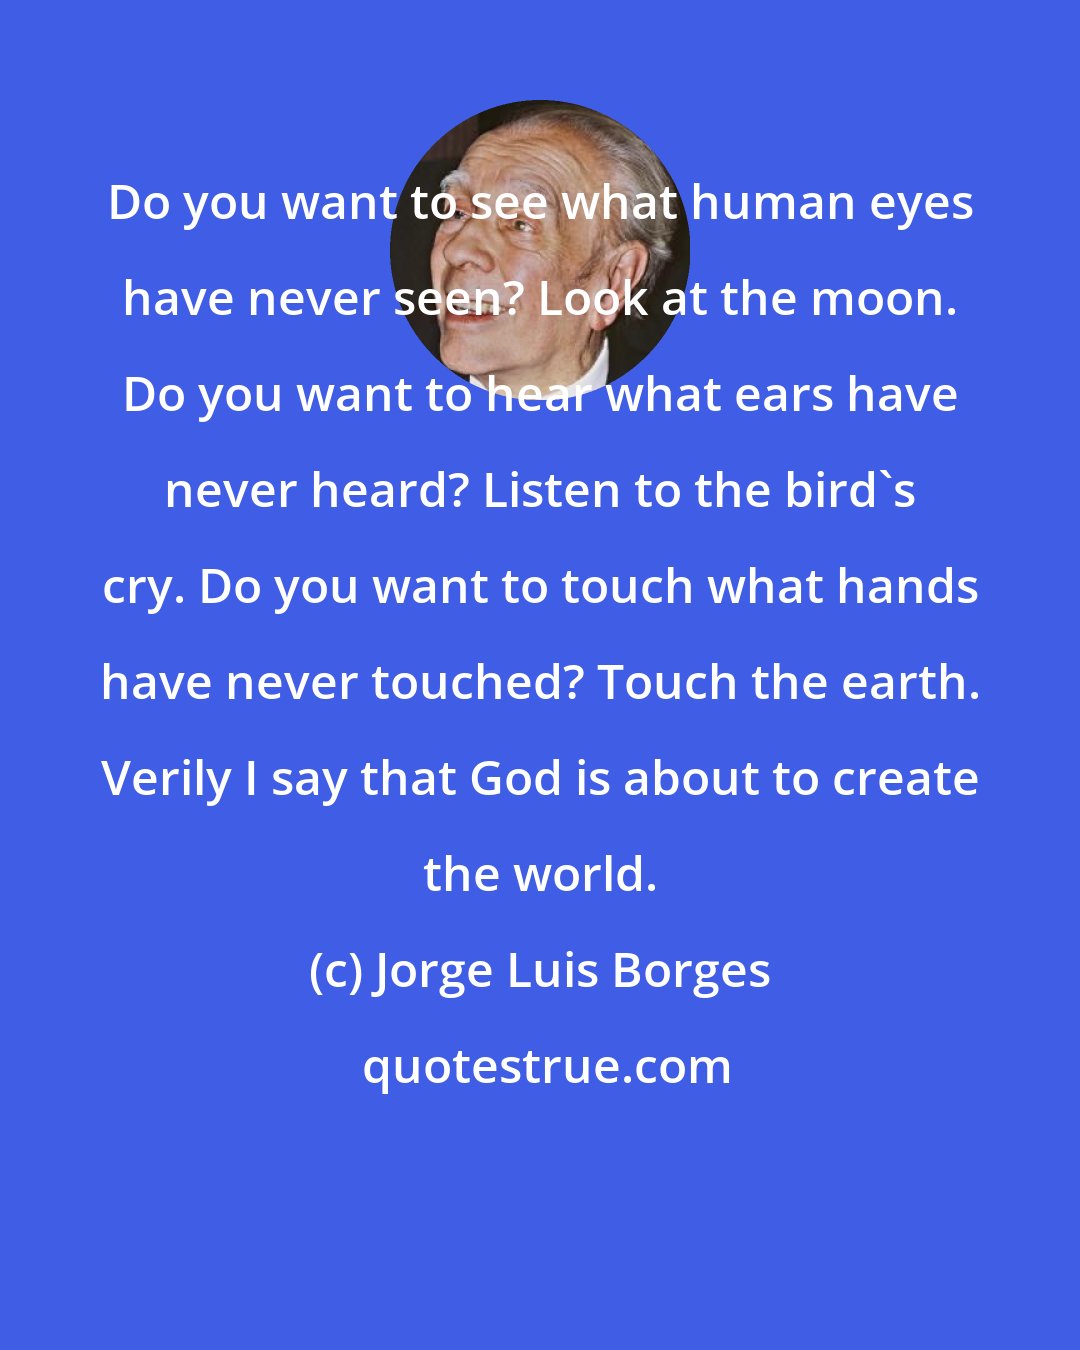 Jorge Luis Borges: Do you want to see what human eyes have never seen? Look at the moon. Do you want to hear what ears have never heard? Listen to the bird's cry. Do you want to touch what hands have never touched? Touch the earth. Verily I say that God is about to create the world.